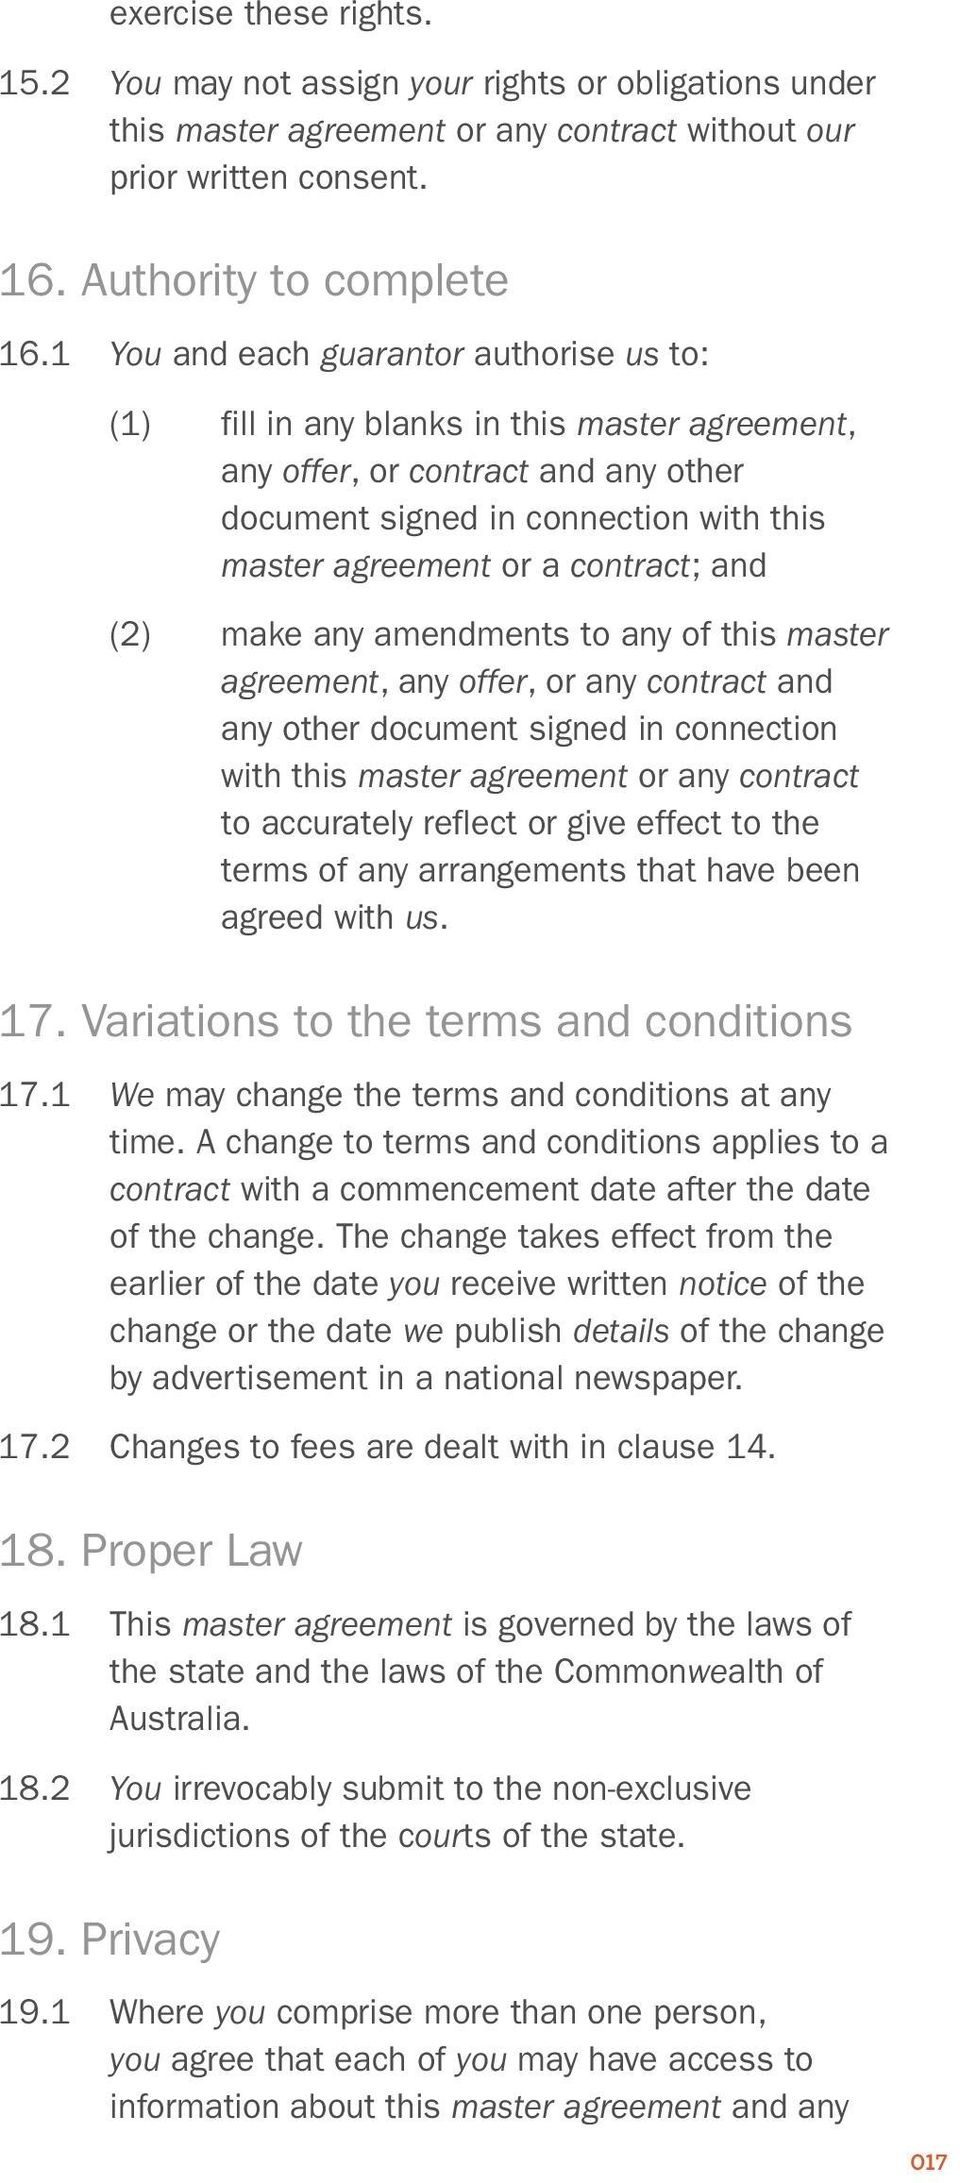 and (2) make any amendments to any of this master agreement, any offer, or any contract and any other document signed in connection with this master agreement or any contract to accurately reflect or